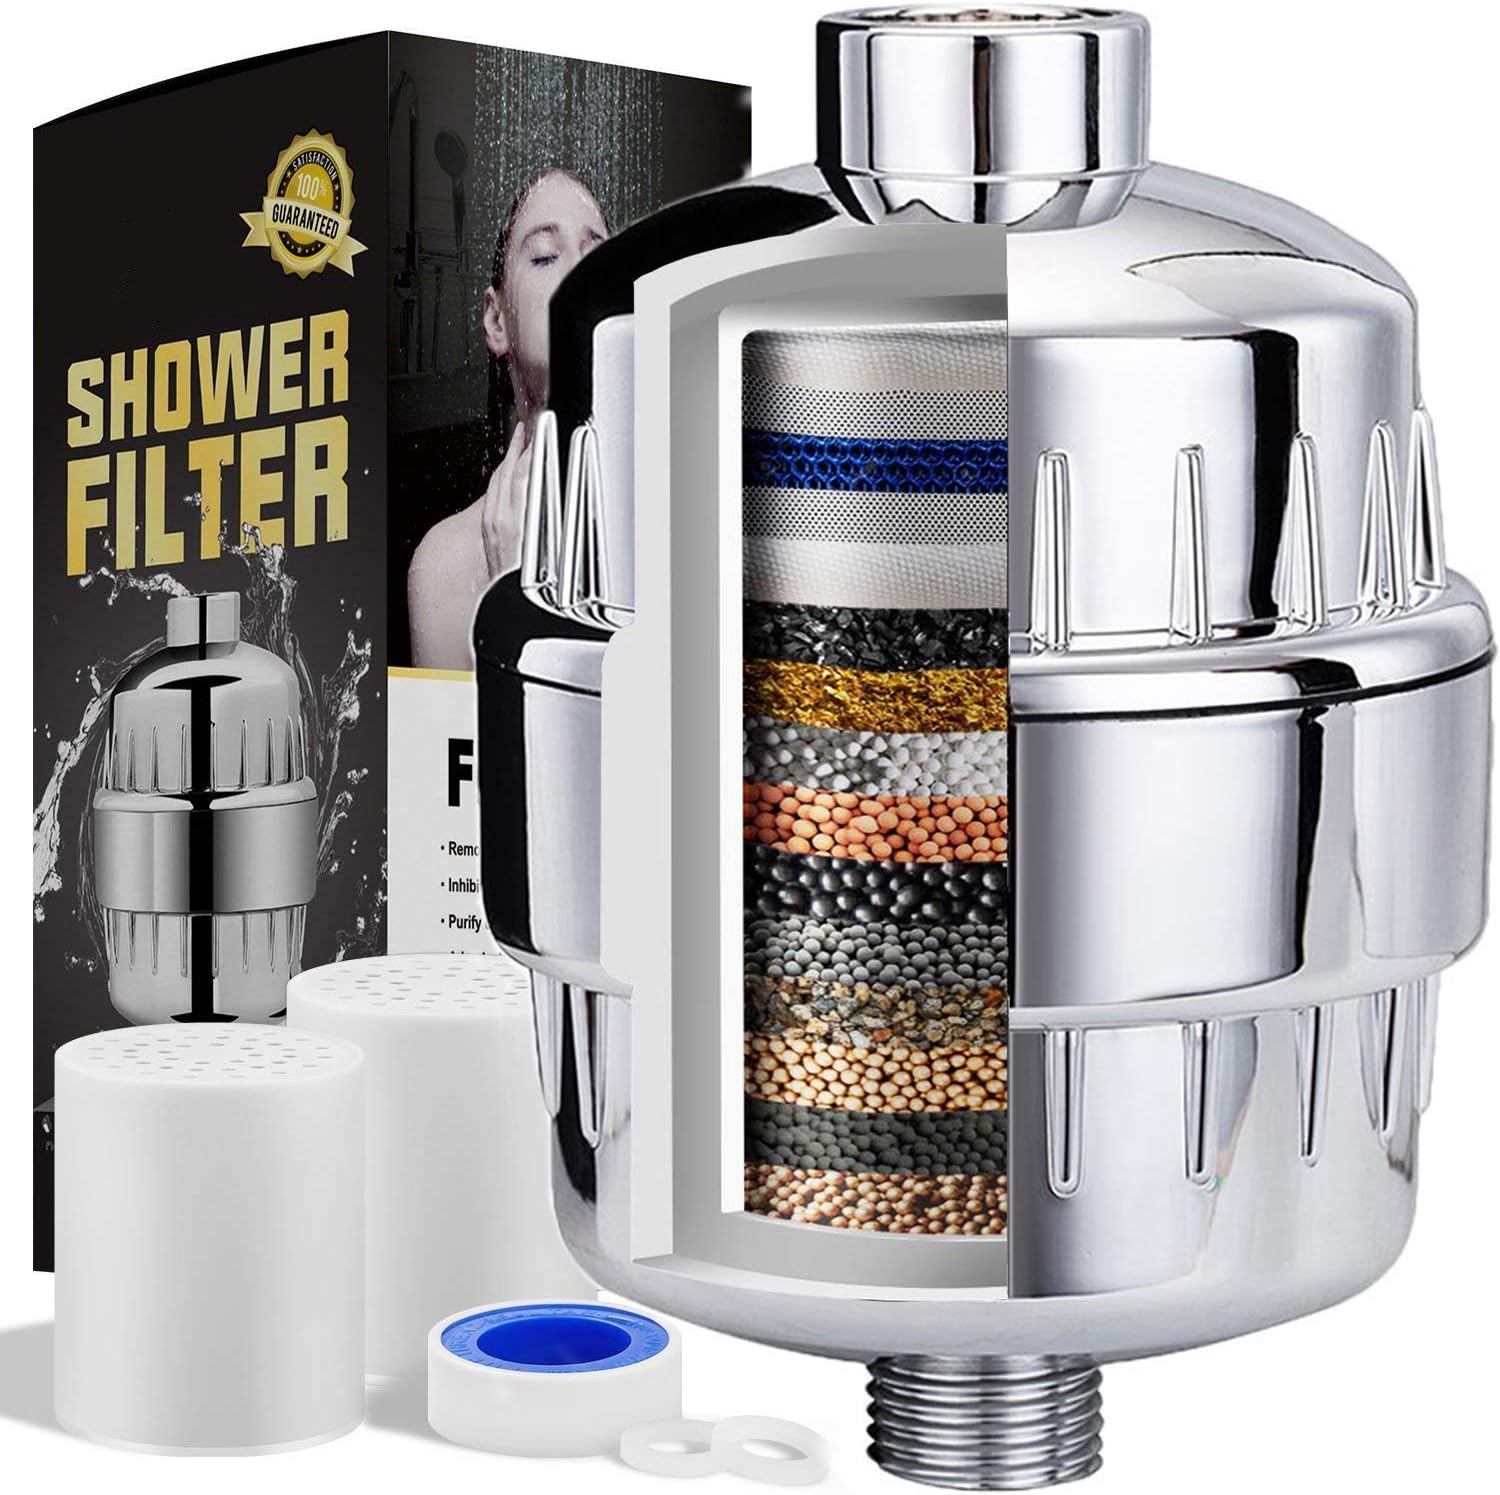 High Output Shower Filter - Reduces Dry Itchy Skin, Dandruff, Eczema, and Dramatically Improves The Condition of Your Skin, Hair and Nails